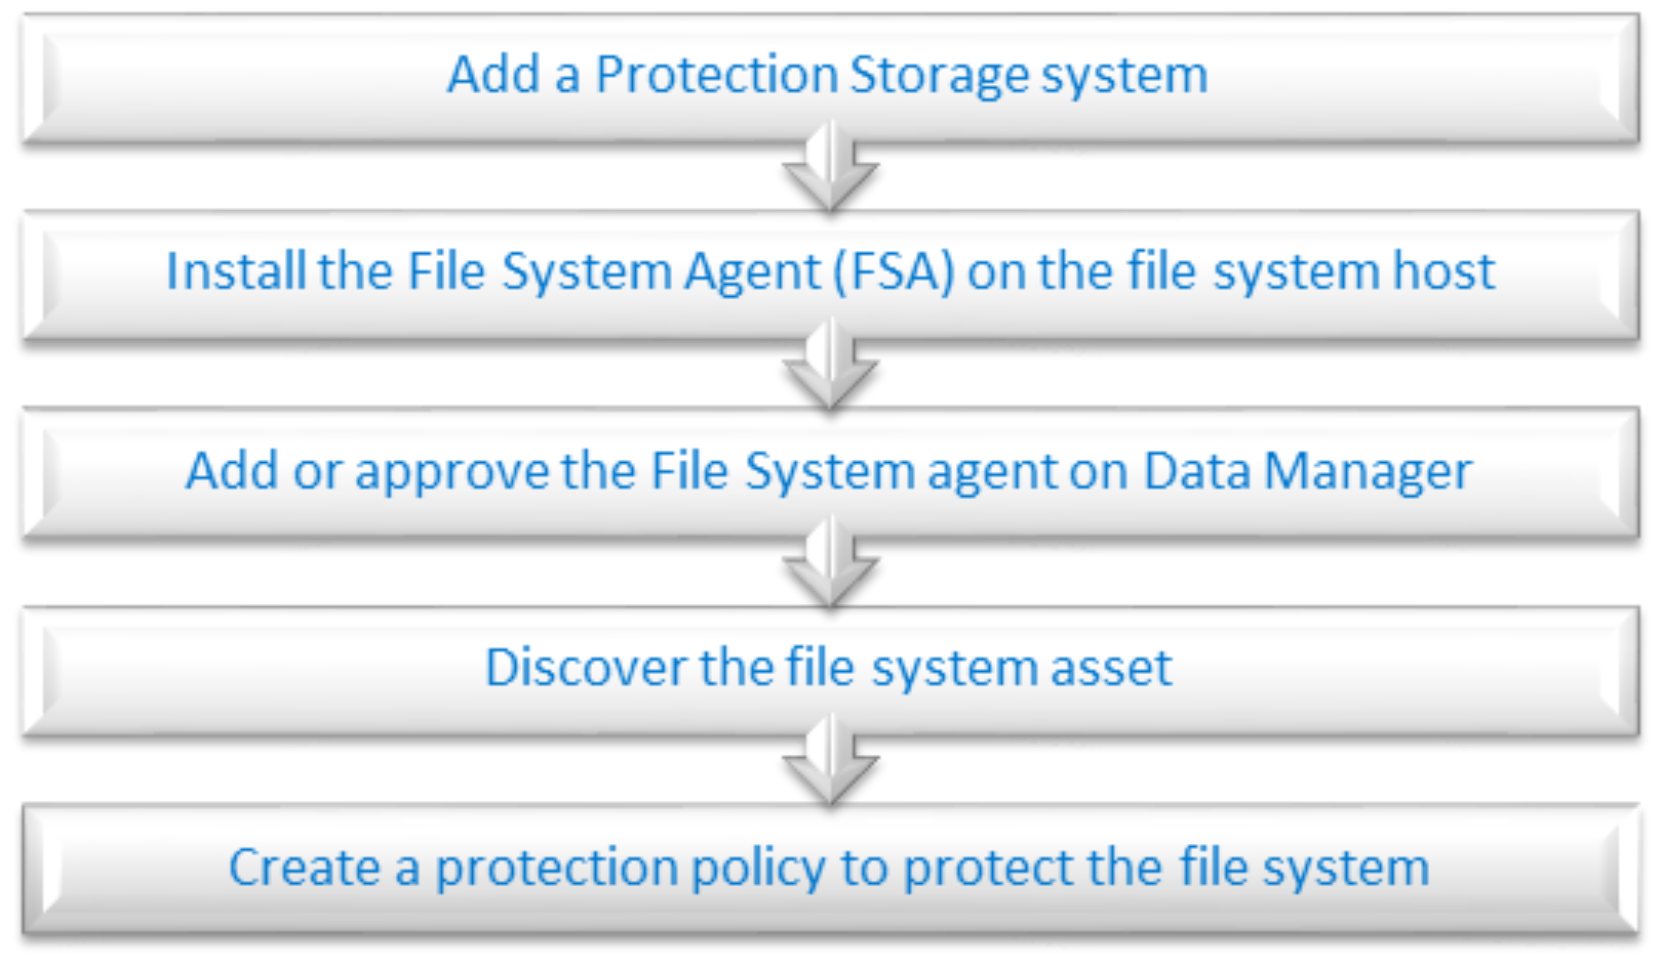 This image shows the roadmap to protect a file system.